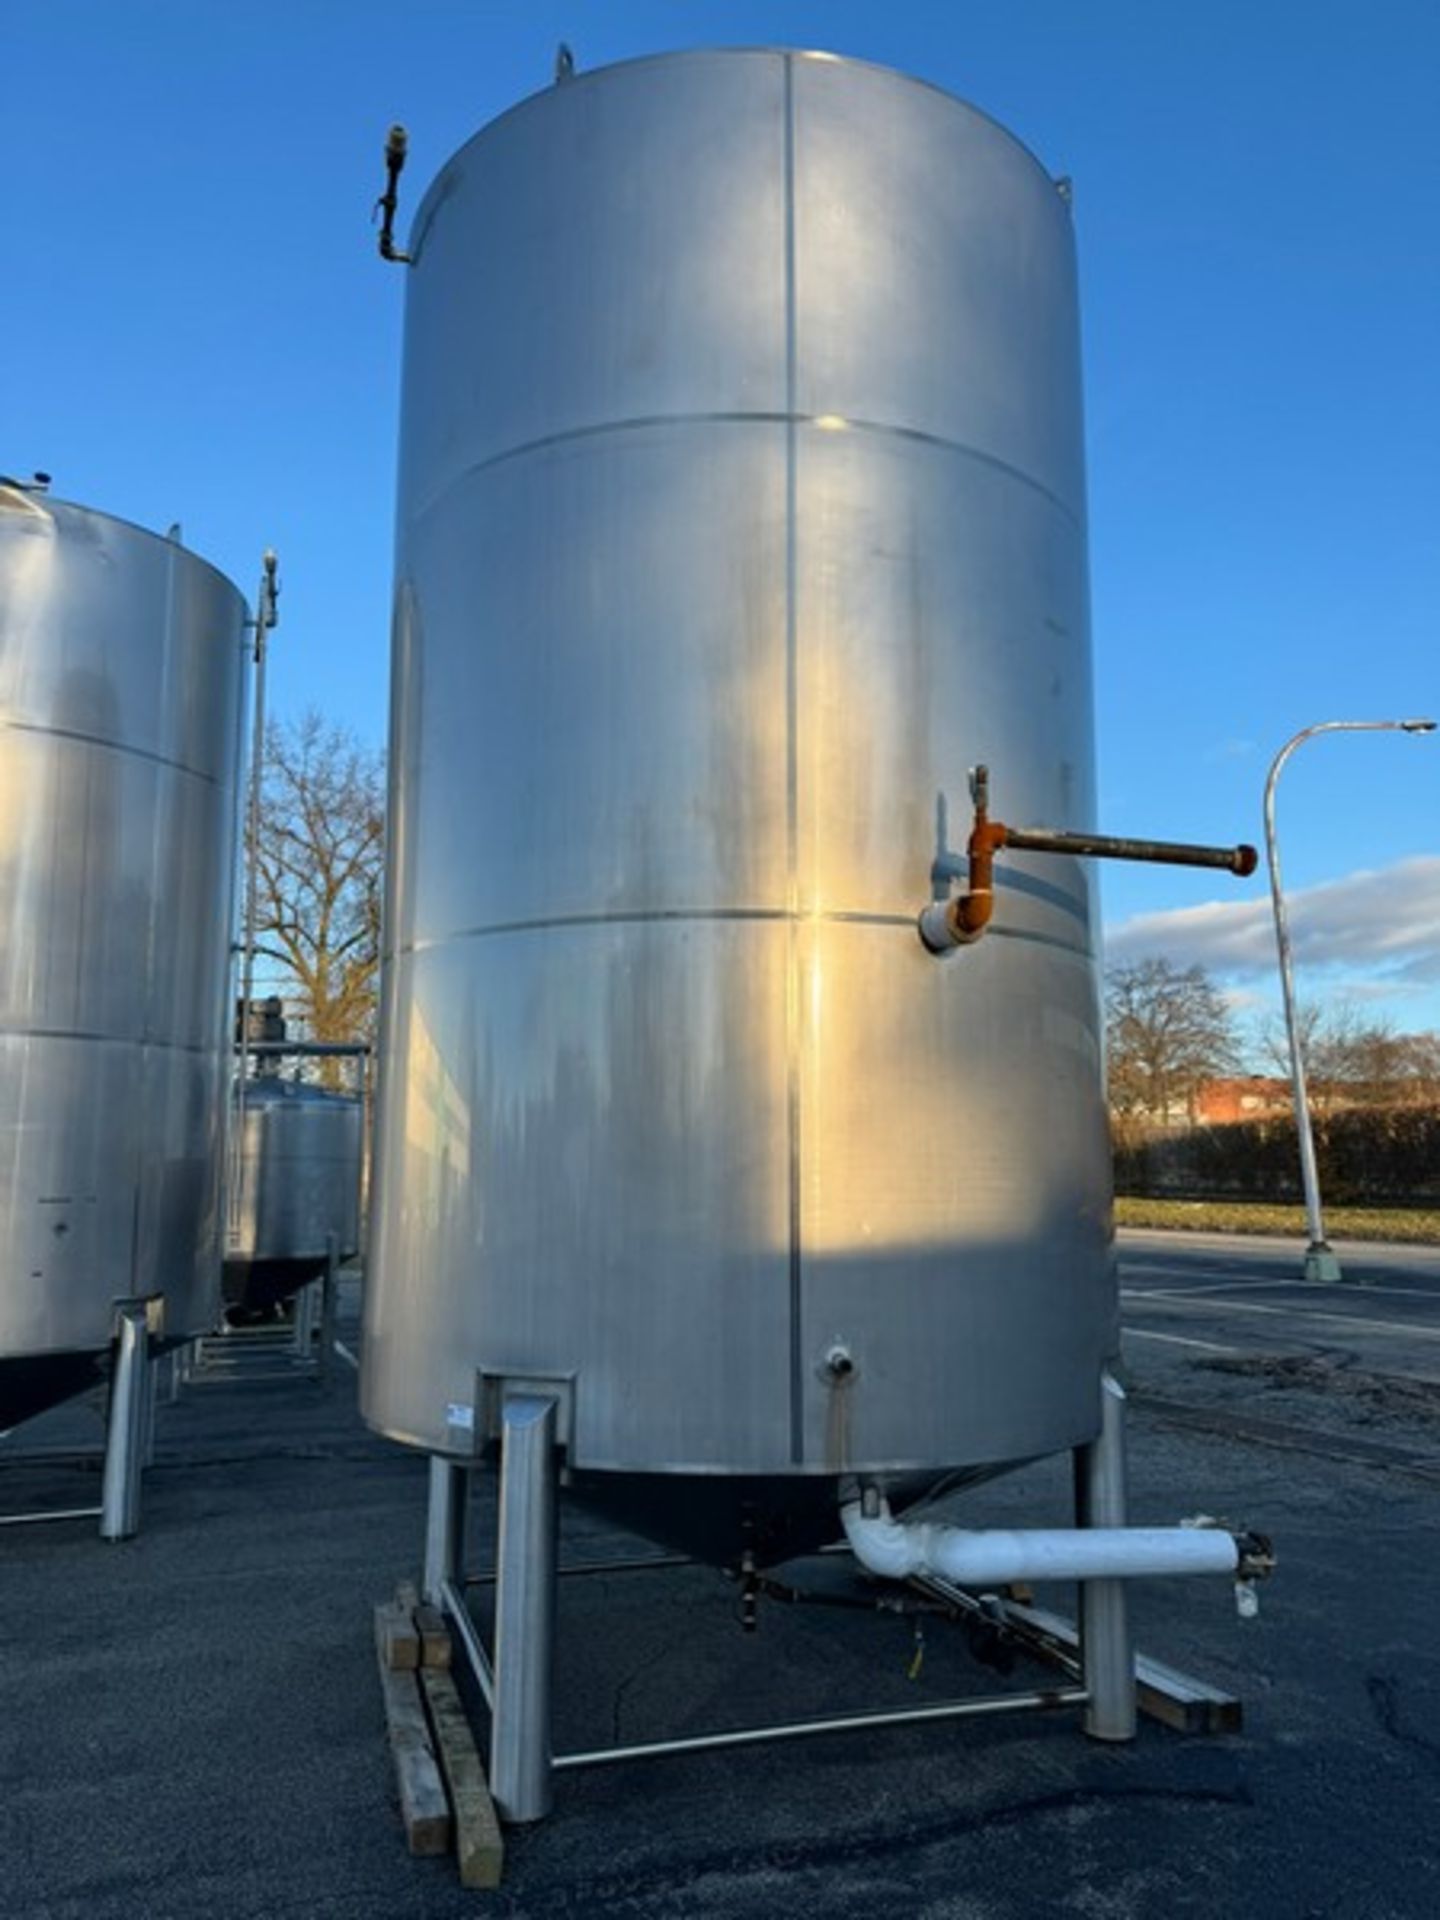 2012 Specific Mechanical Systems 200 BBL Capacity S/S Cold Liquor Tank, S/N RMP-136-12-300, with S/S - Bild 2 aus 10